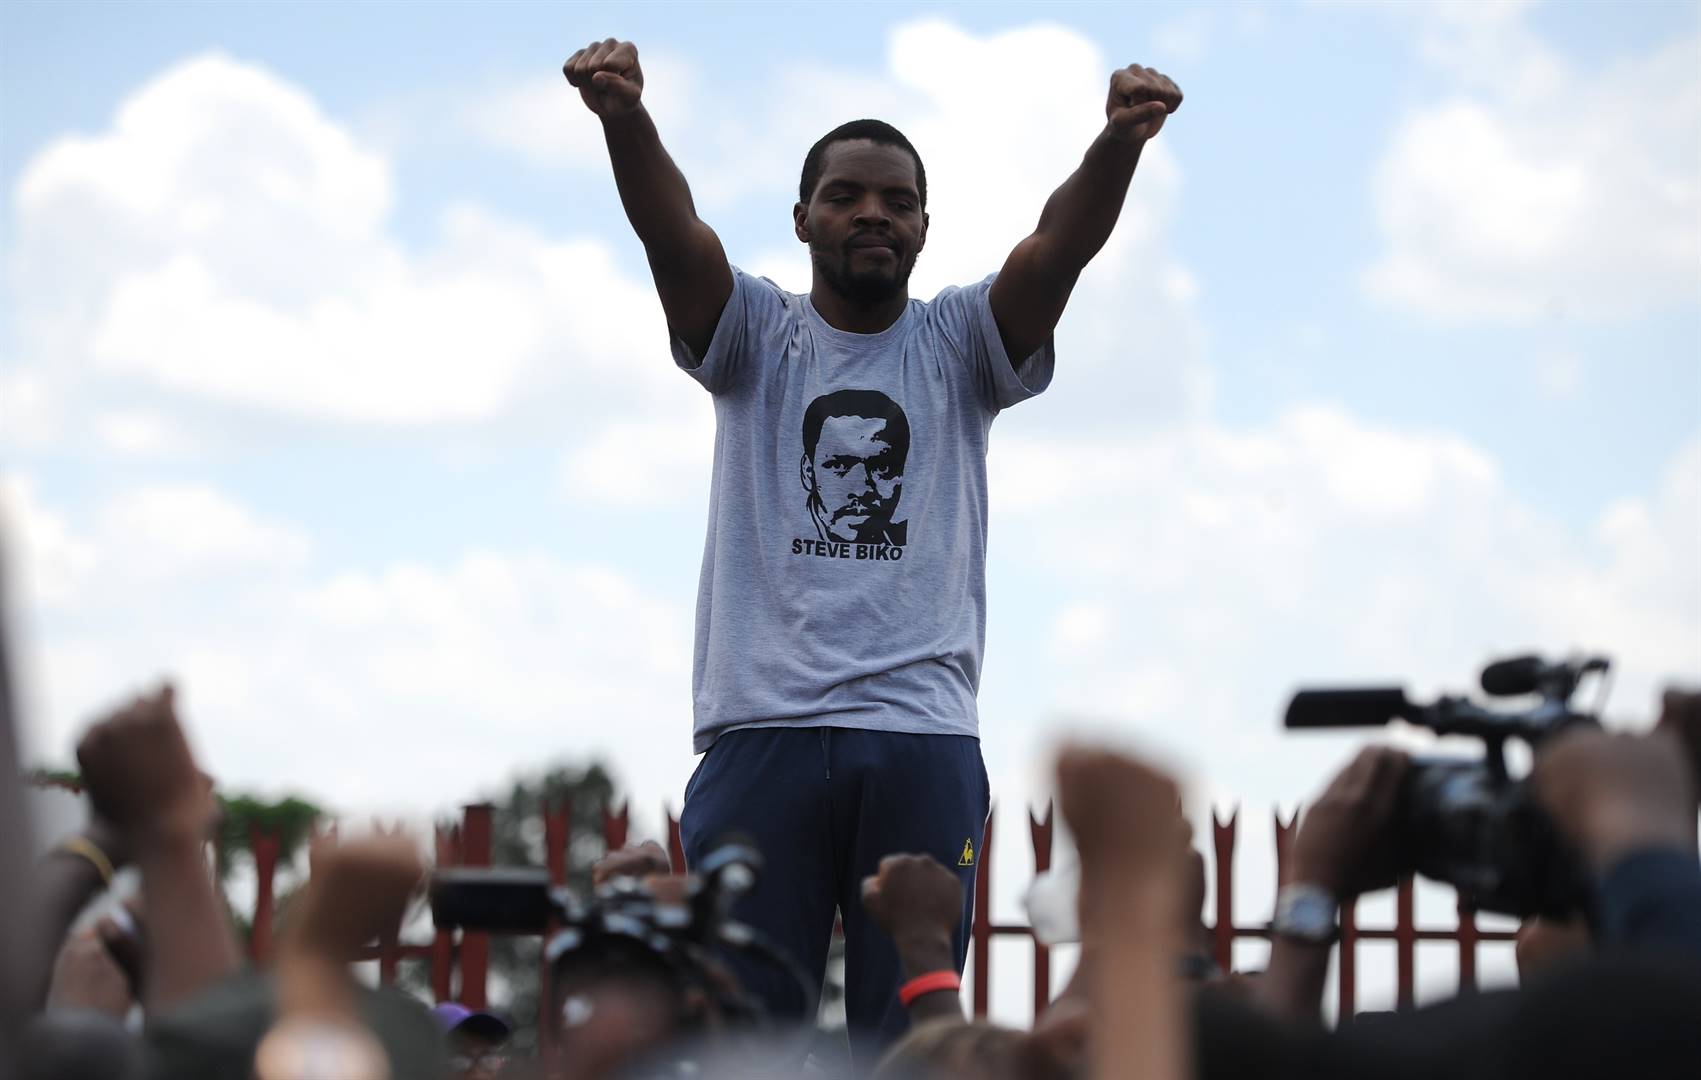 Mcebo Dlamini, the leader of the Fees Must Fall movement at Wits university, addresses a crowd outside the Palm Ridge magistrates’ court after being released on charges related to the protests. Picture: Felix Dlangamandla/Netwerk24